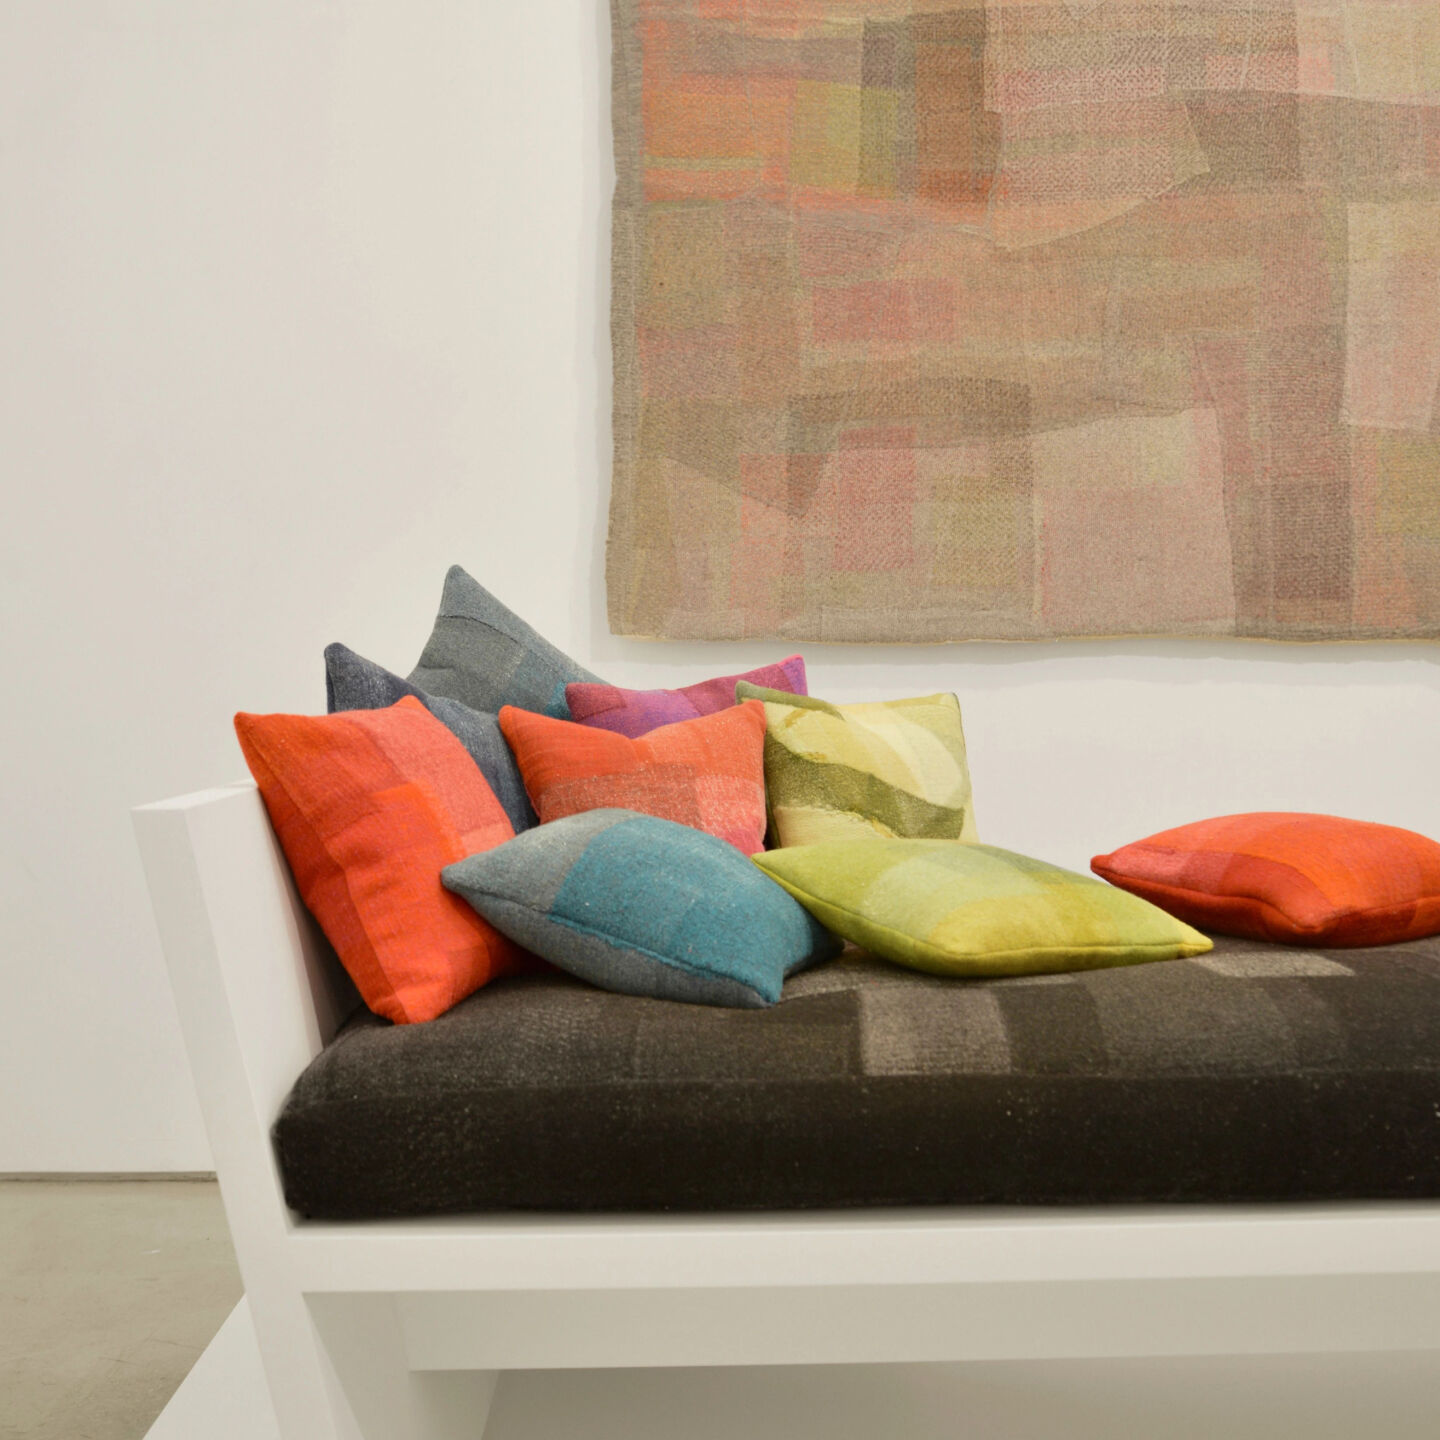 Felted EILEEN FISHER pillows and wall hangings made from textile waste.